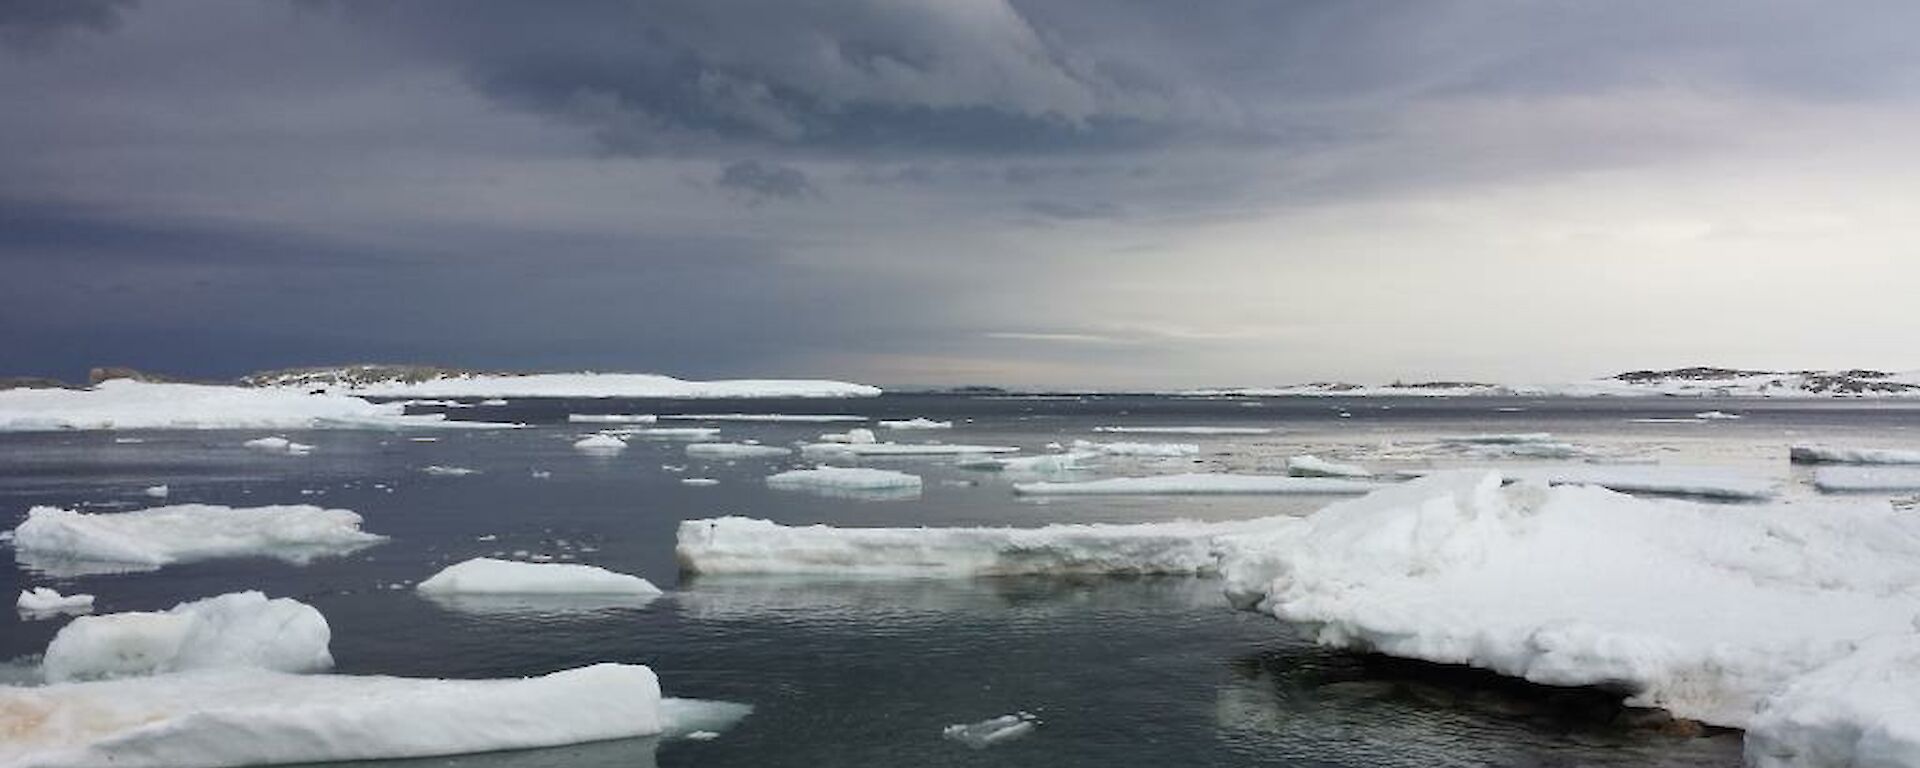 View from wharf hut which looks over the sea ice and water — beautiful